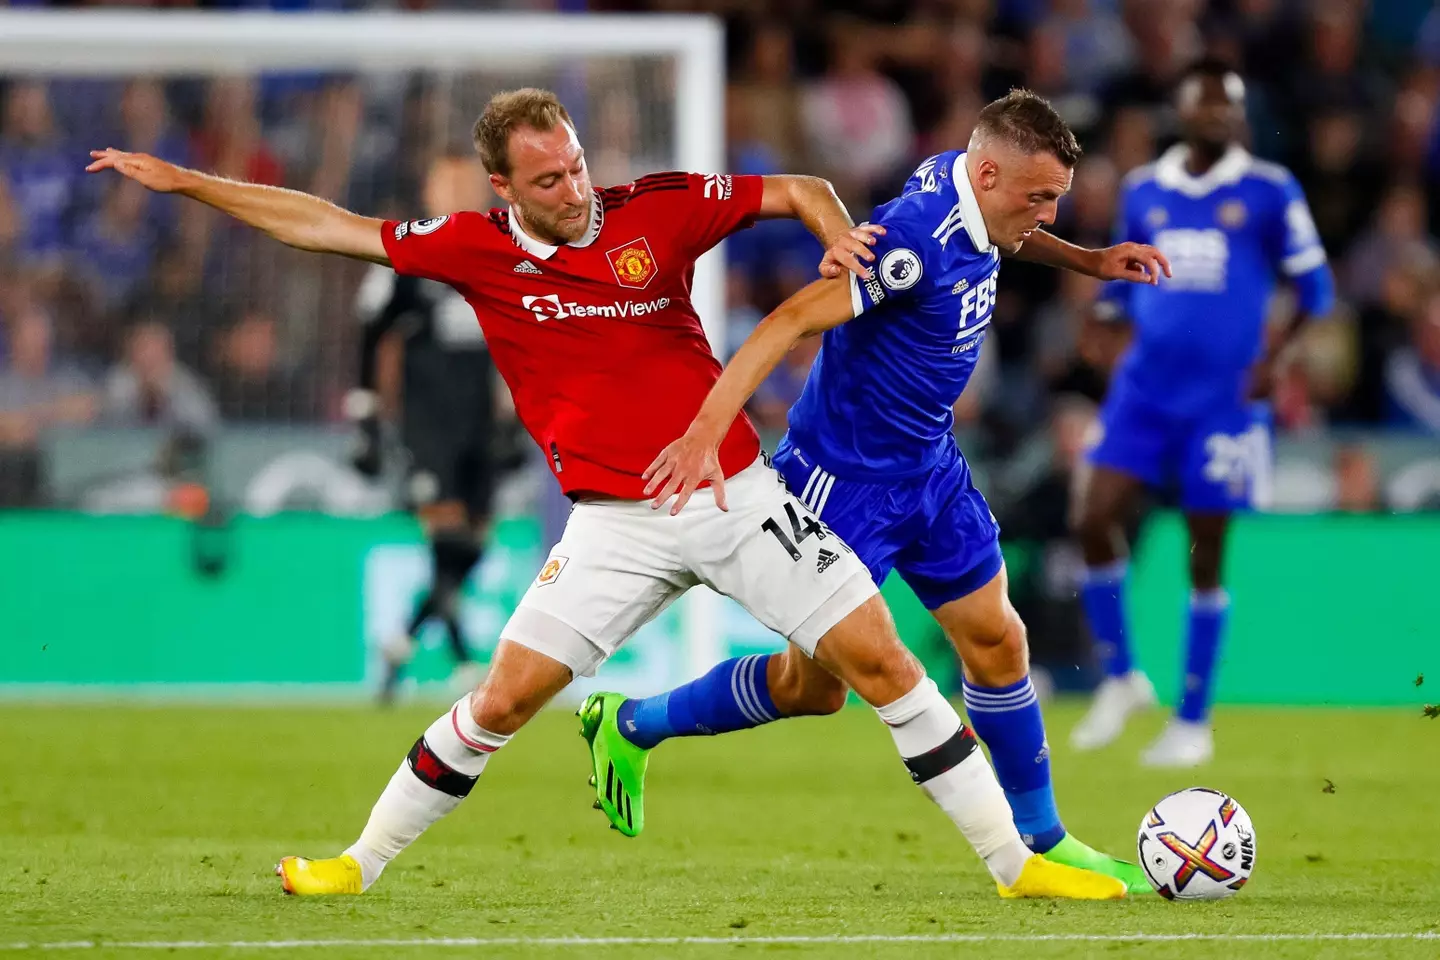 Vardy played 87 minutes as Leicester were beaten 1-0 by United on Thursday (Image: Alamy)